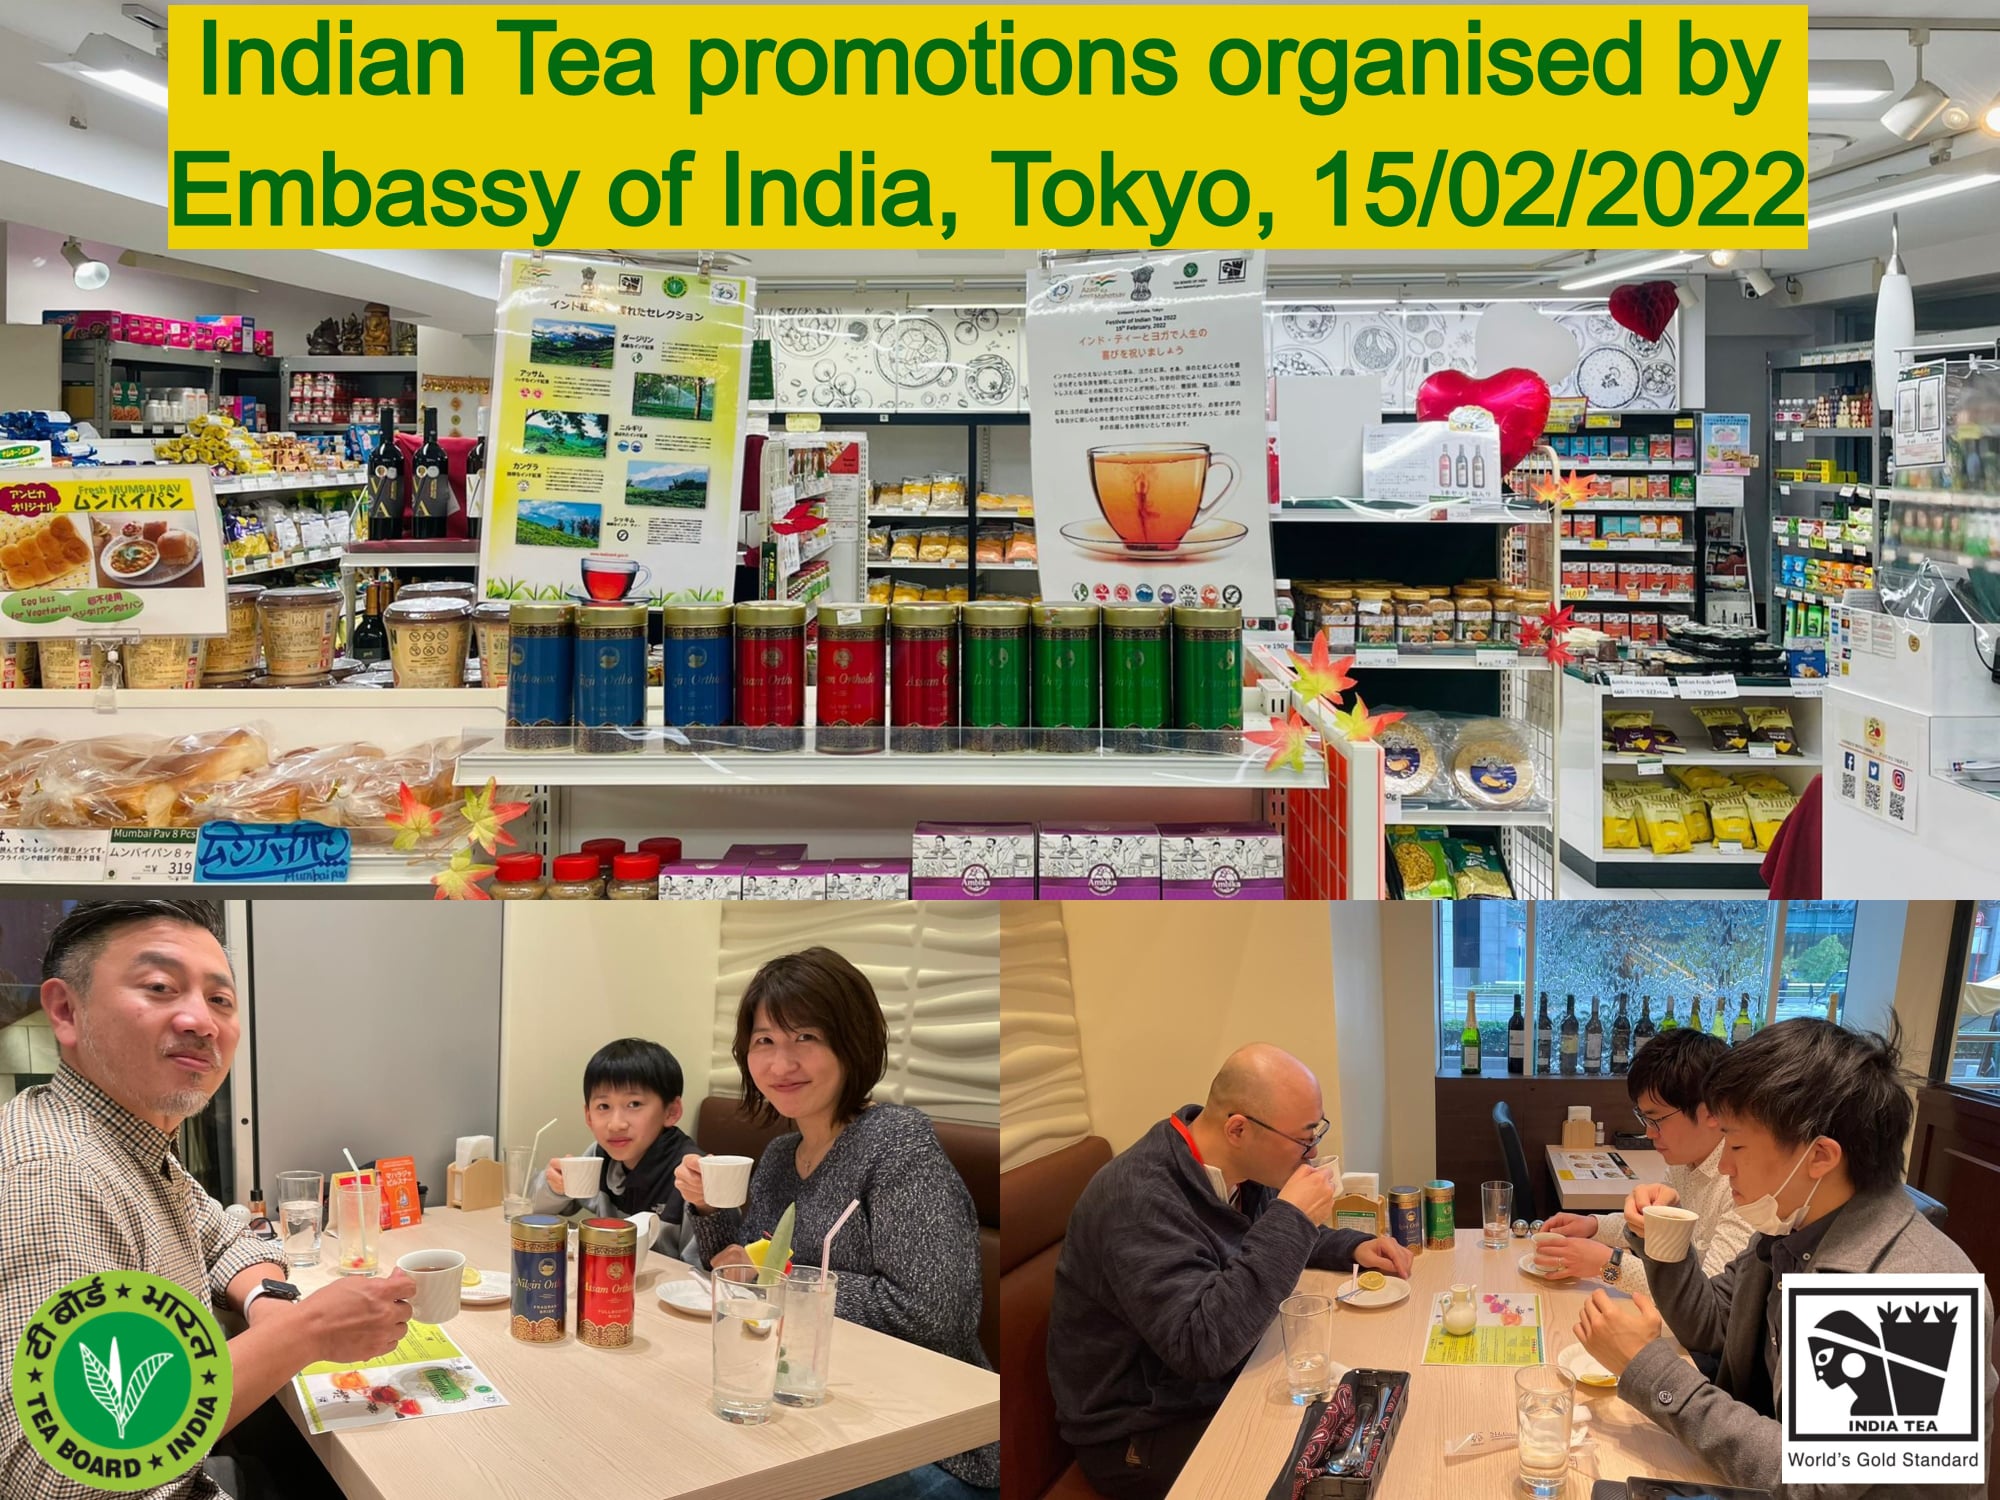 Indian Tea promotions organised by Embassy of India, Tokyo, 15-02-2022